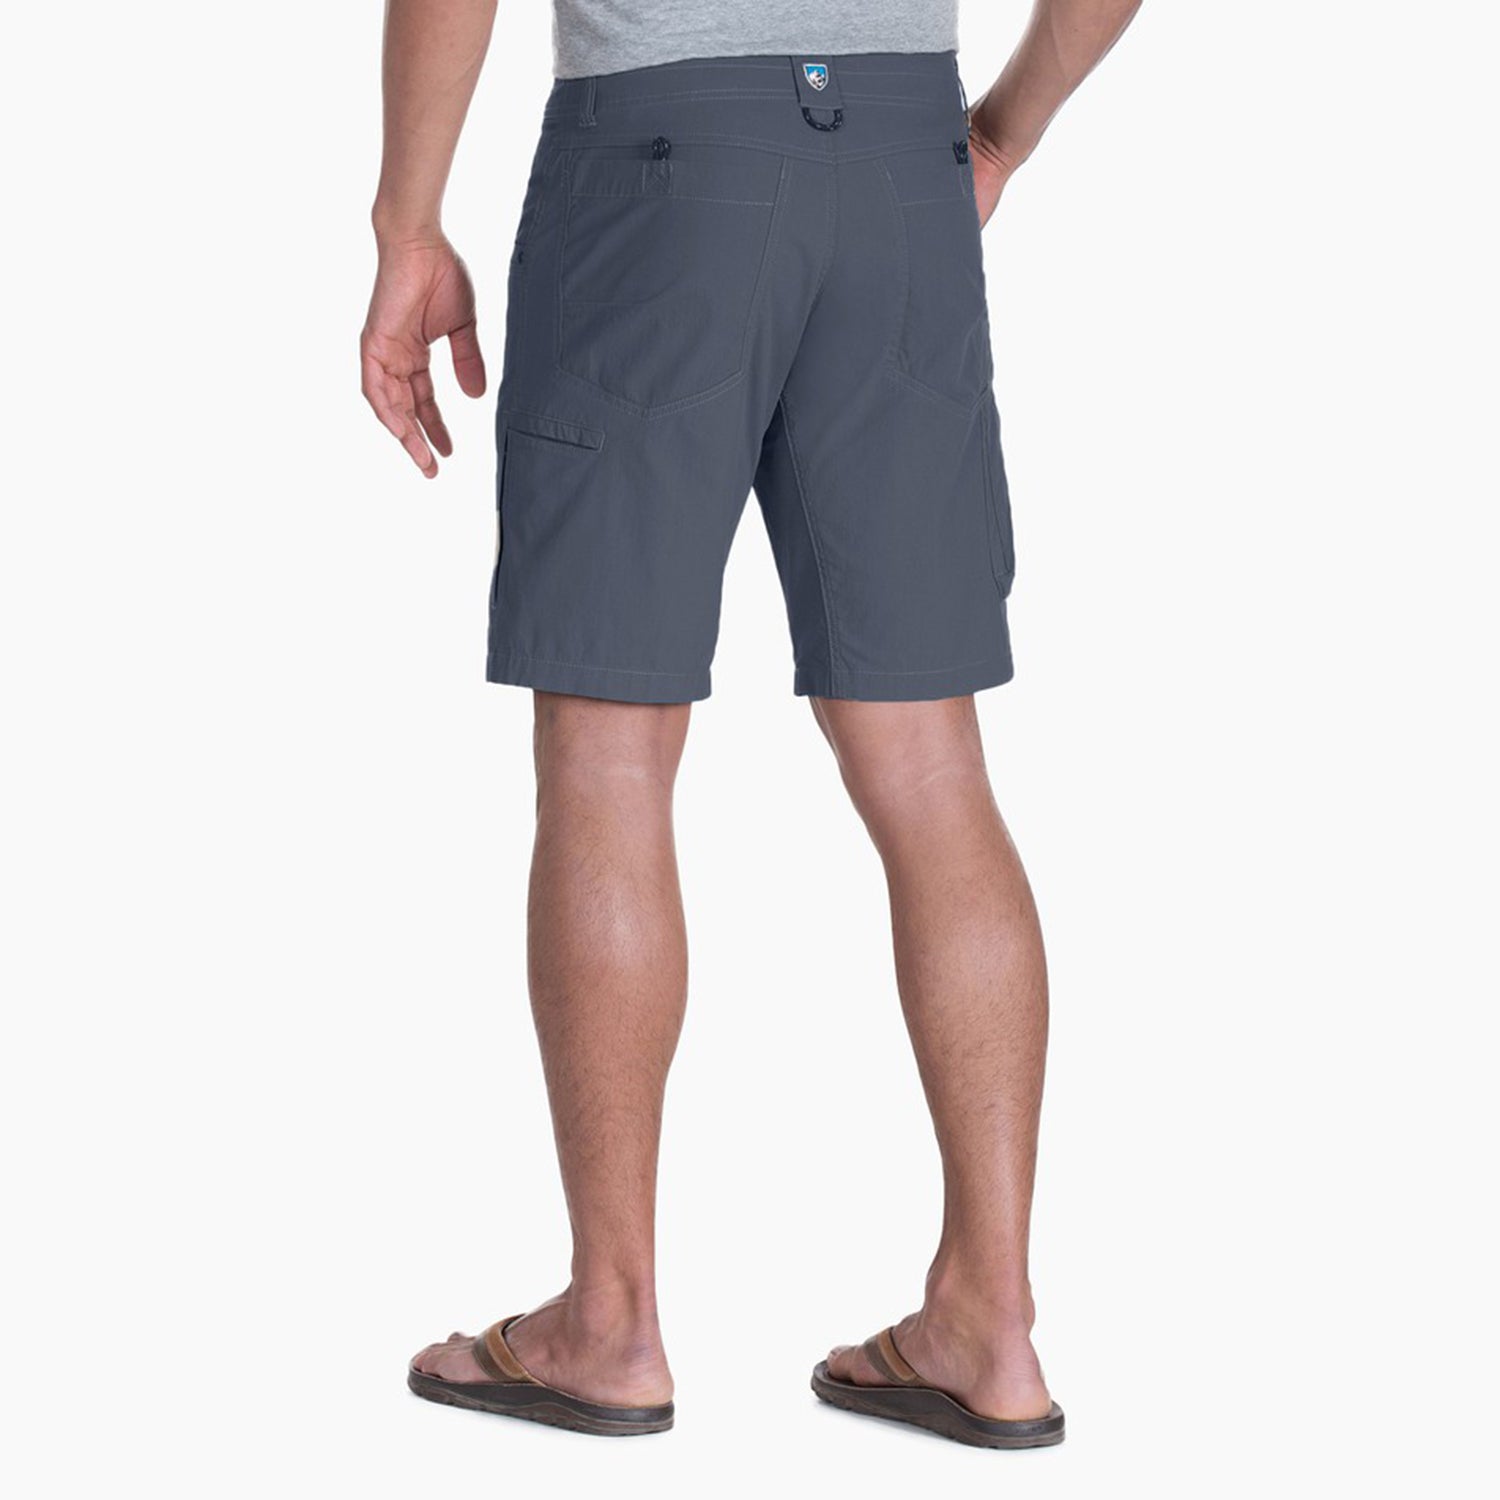 kuhl hiking shorts mens on model back view in color blue grey